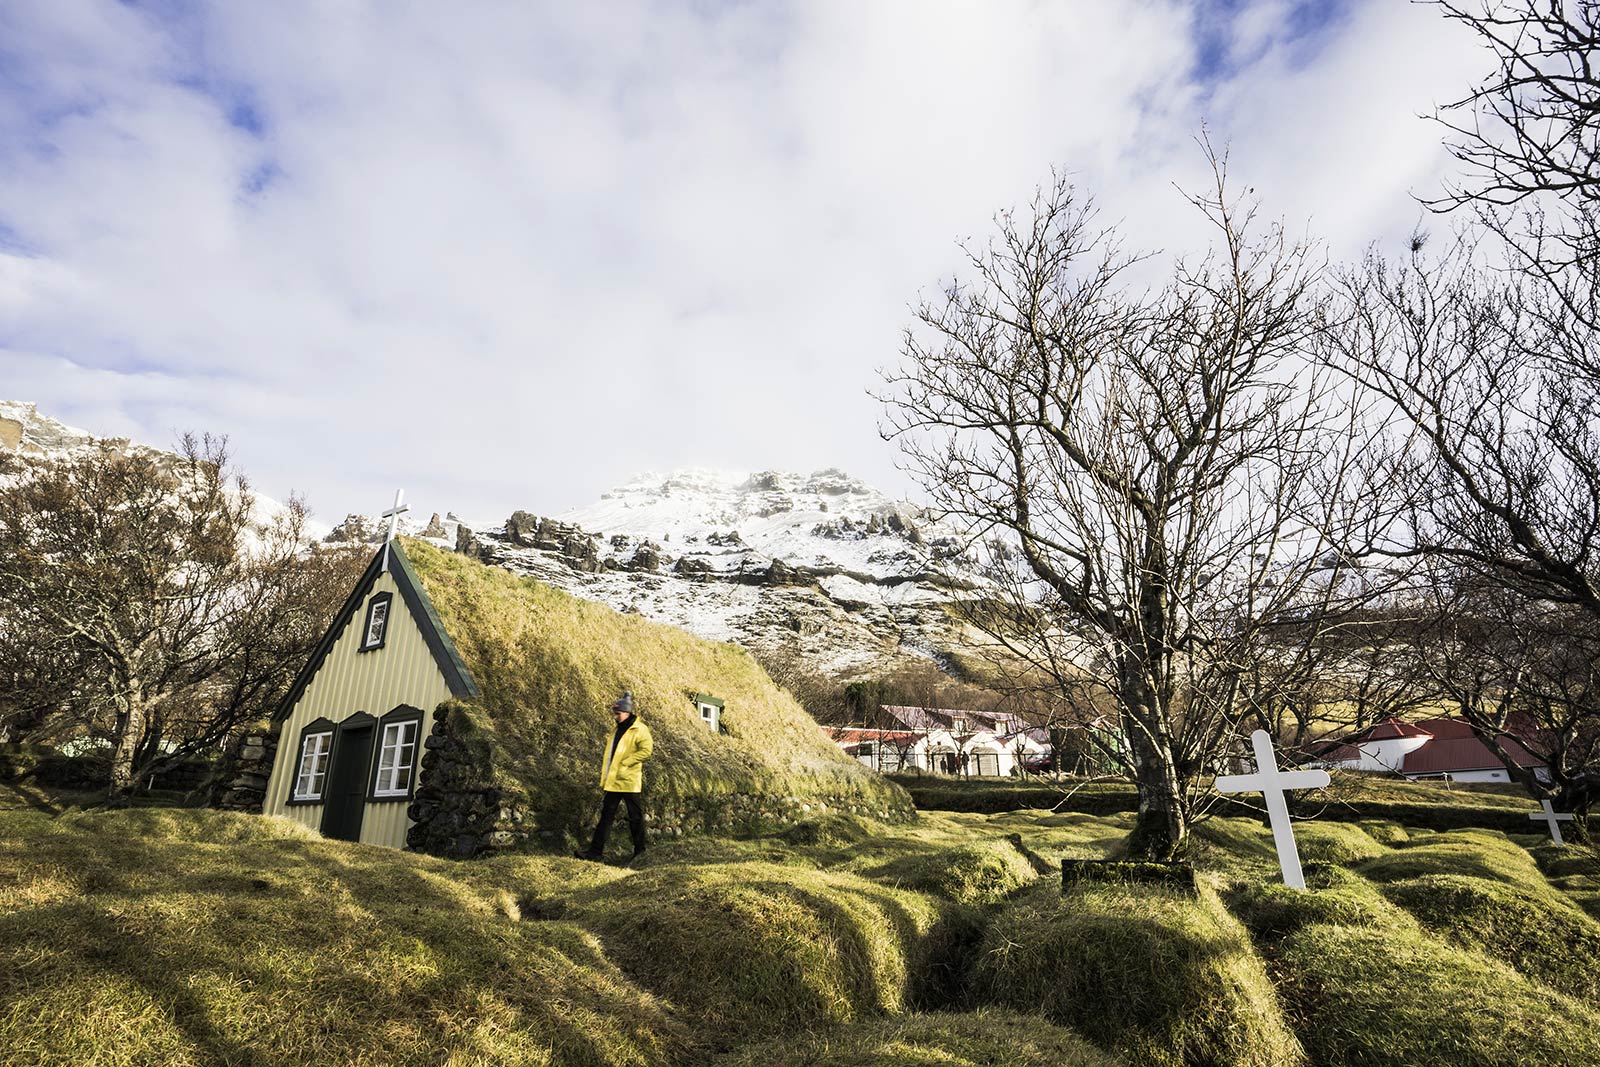 Church with turf roof in Iceland. Waking up in a winter wonderland